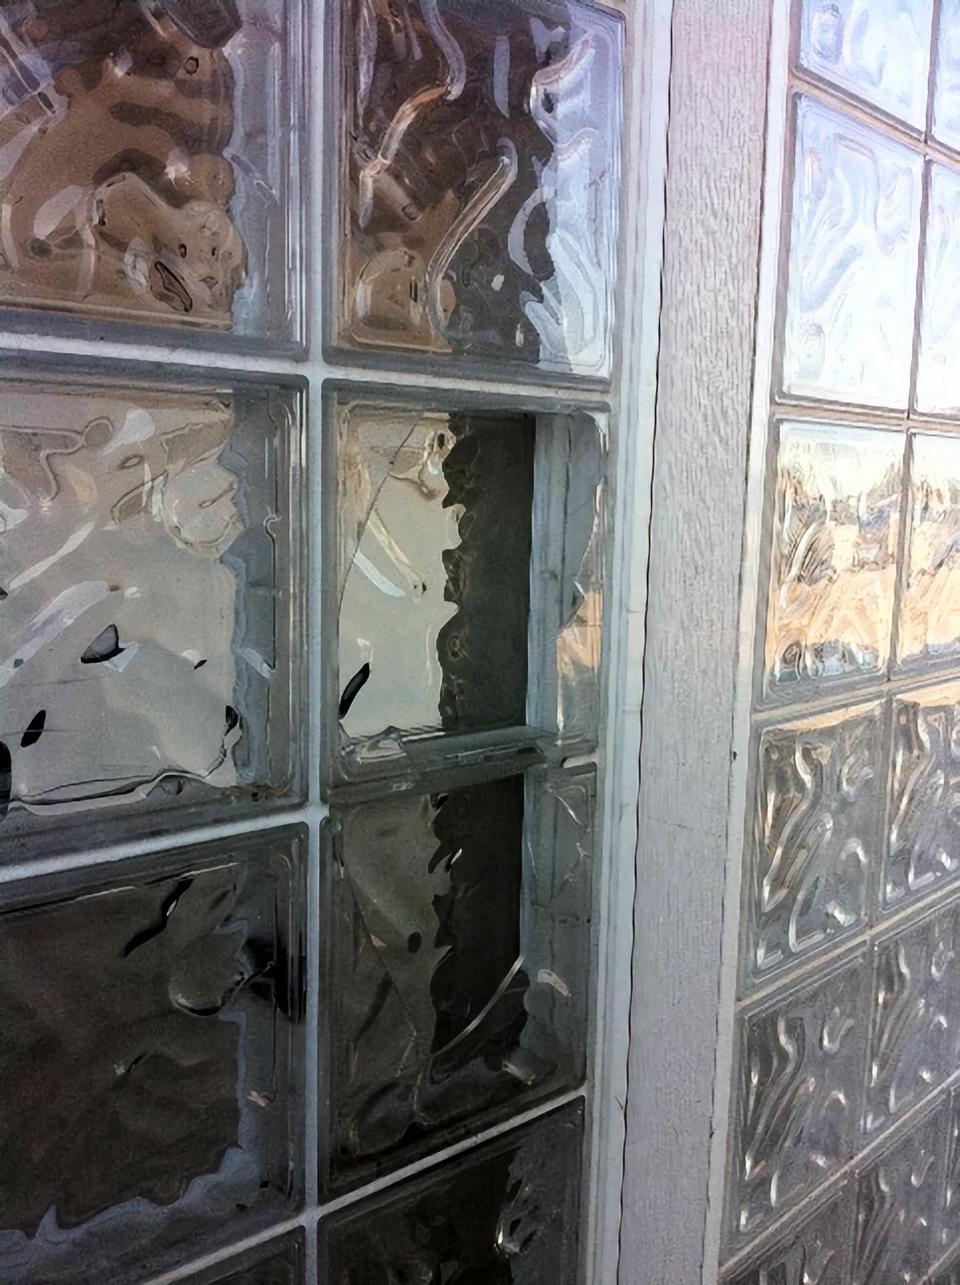 A few synthetic glass blocks were damaged by the tornado.